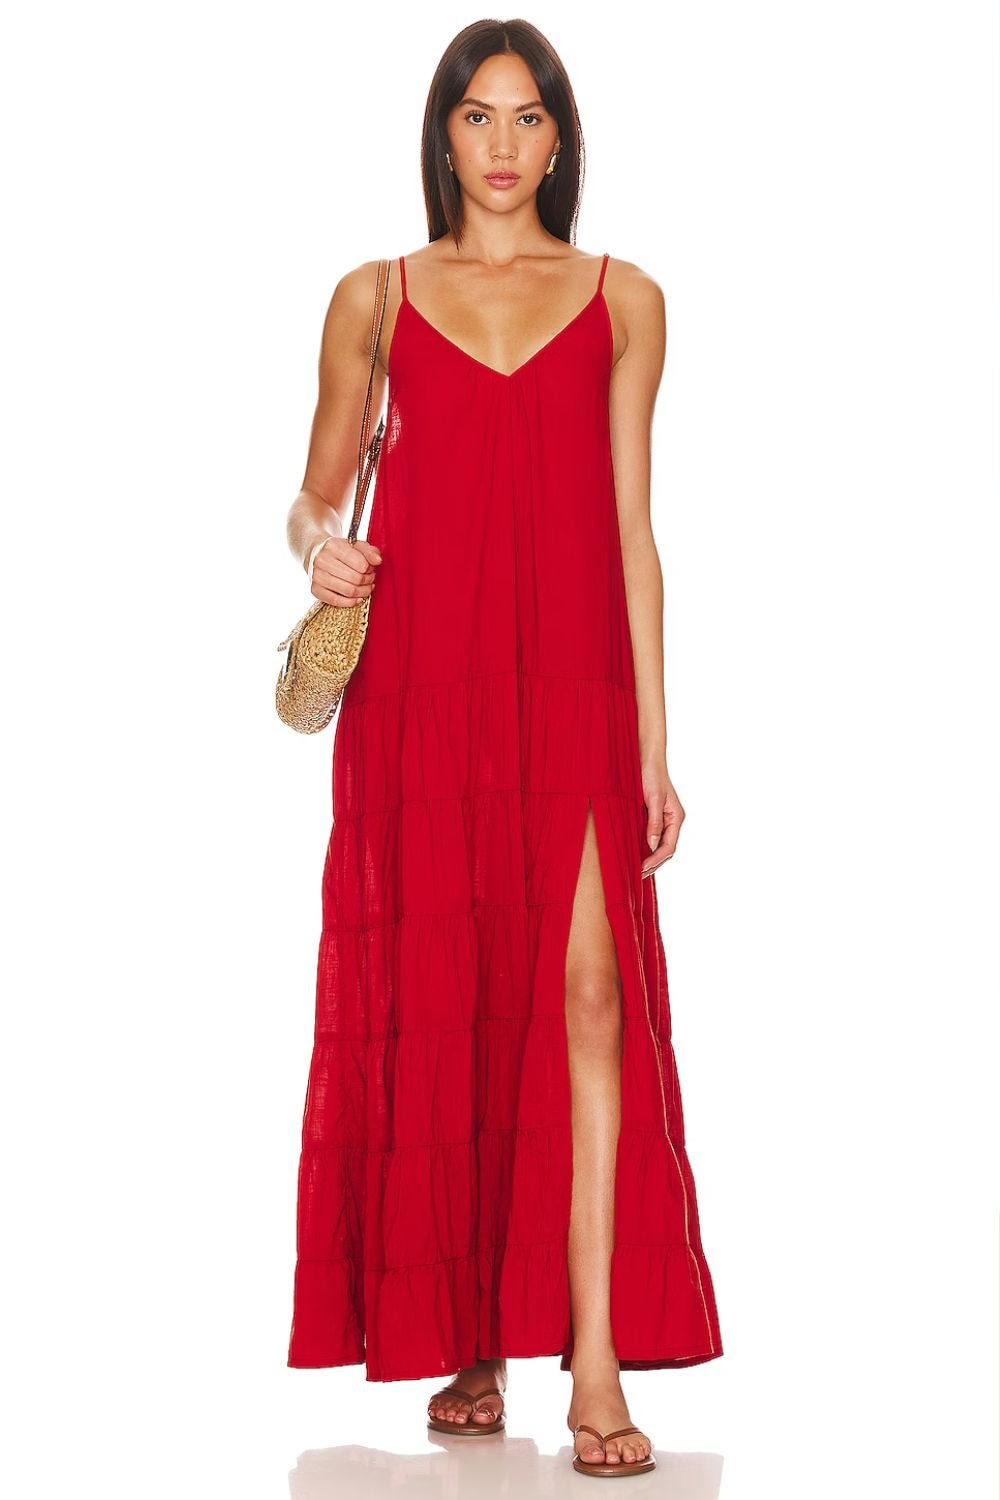 What to wear in Bali Red Maxi Dress